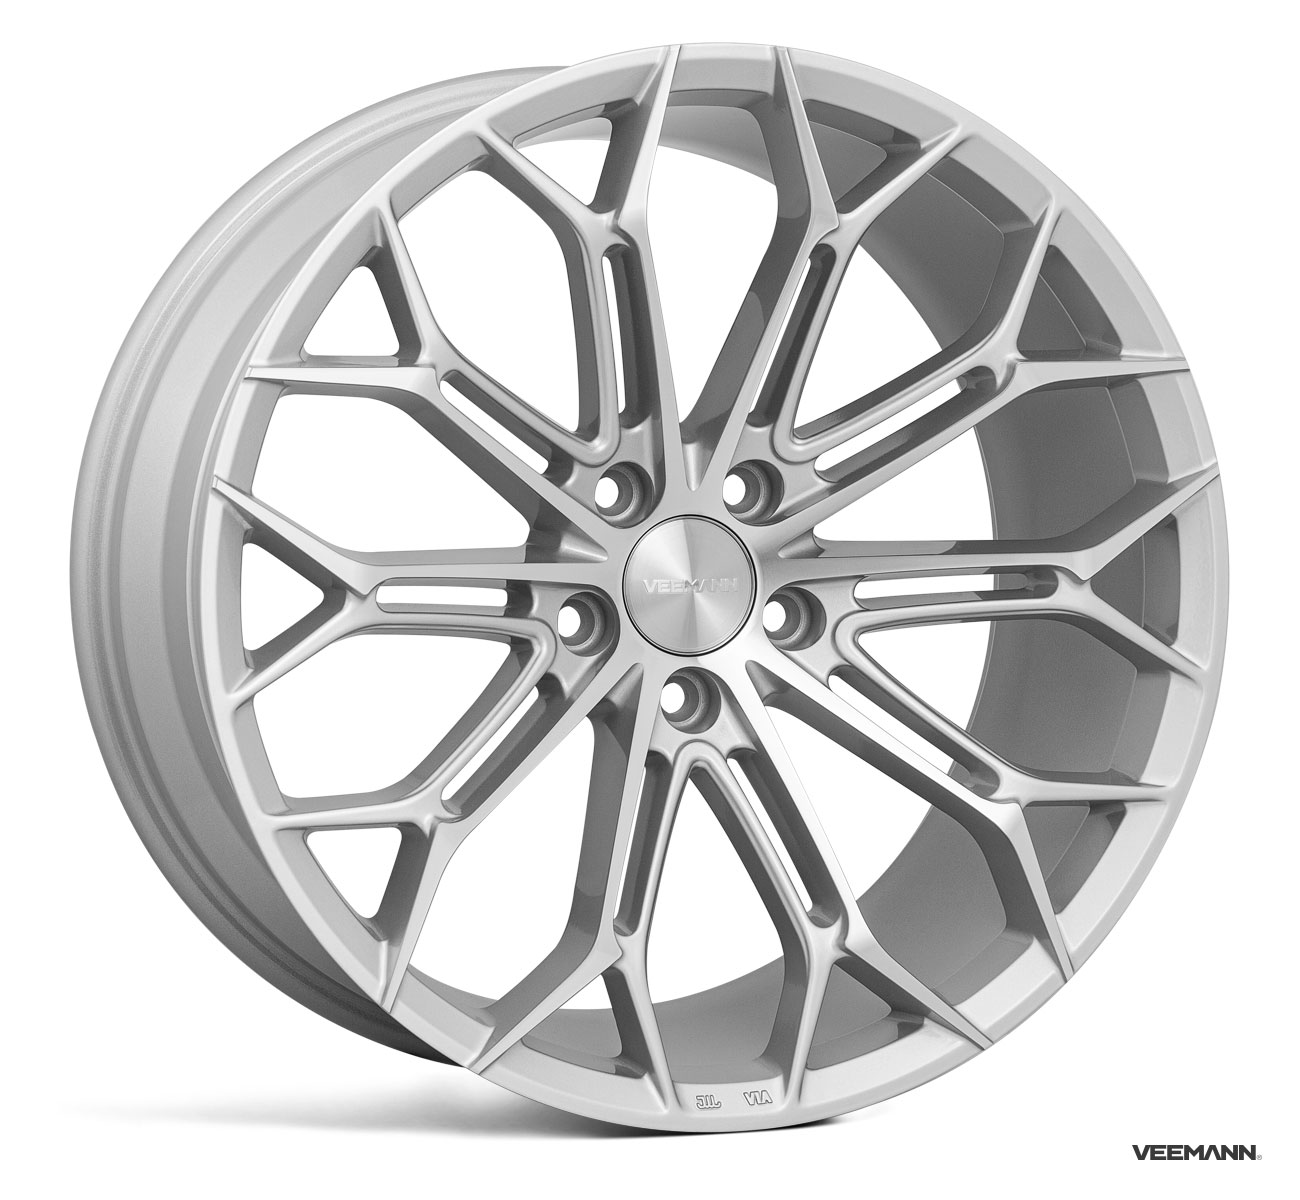 NEW 19" VEEMANN V-FS41 ALLOY WHEELS IN SILVER POL WITH WIDER 9.5" REARS